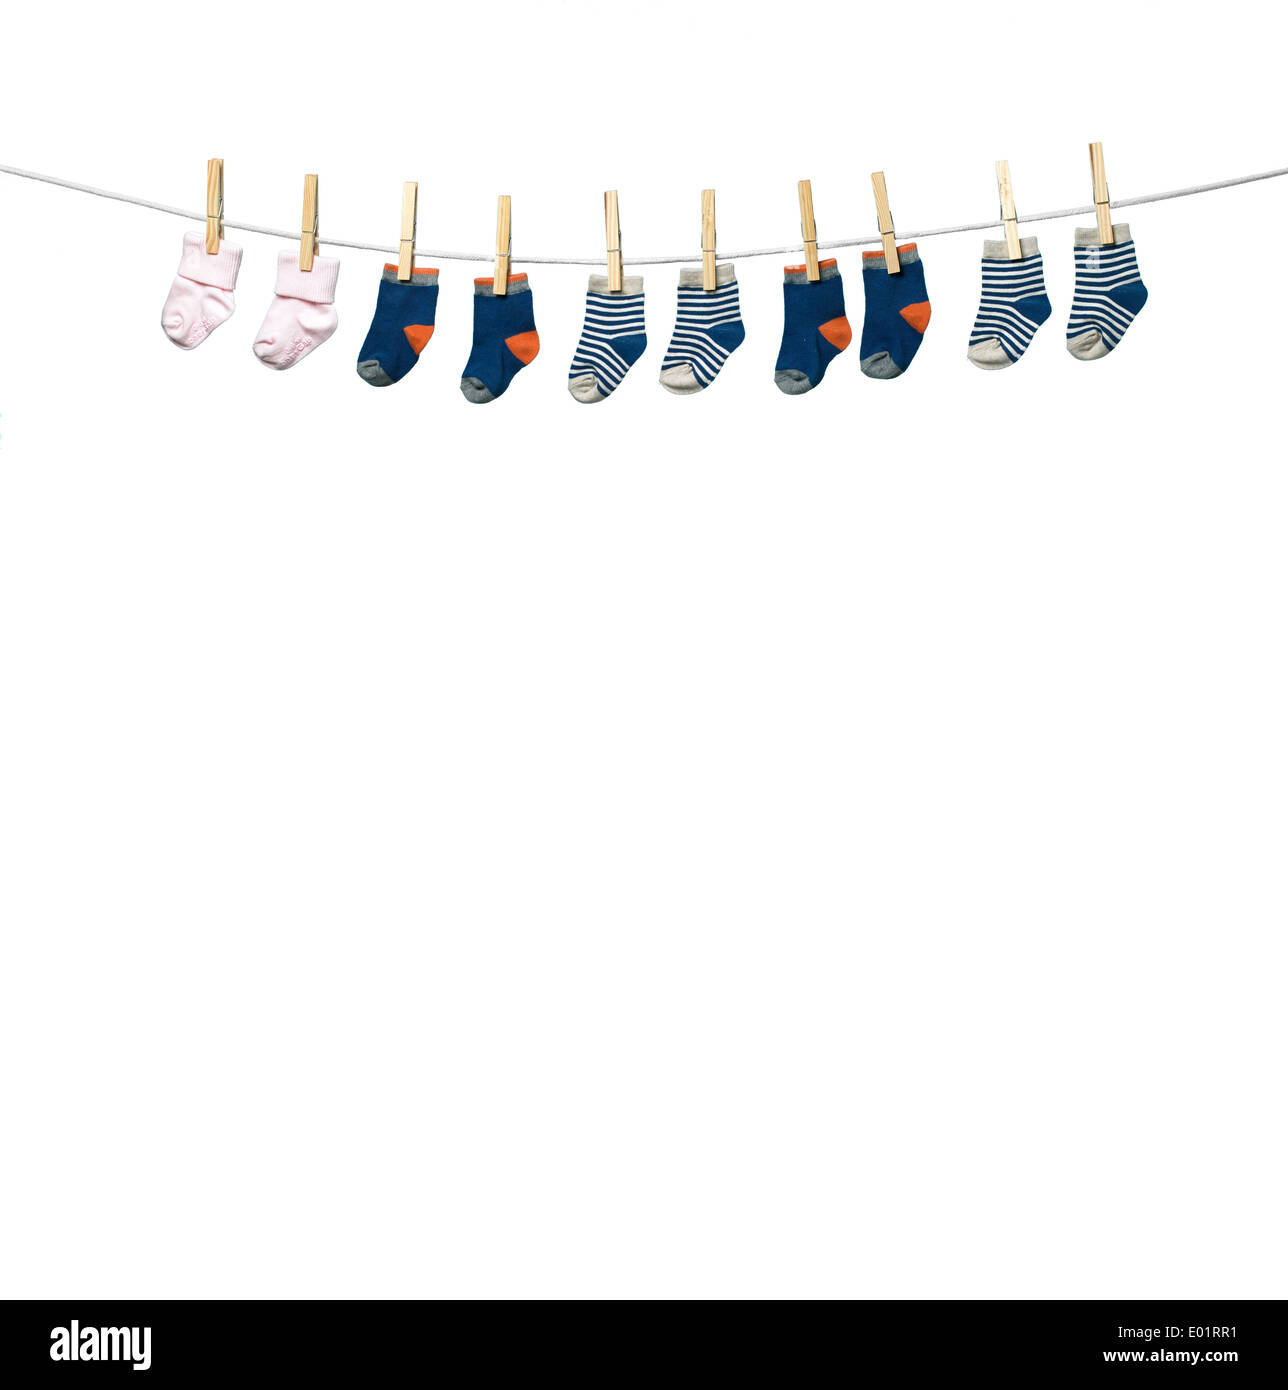 Clothes line of small socks Stock Photo